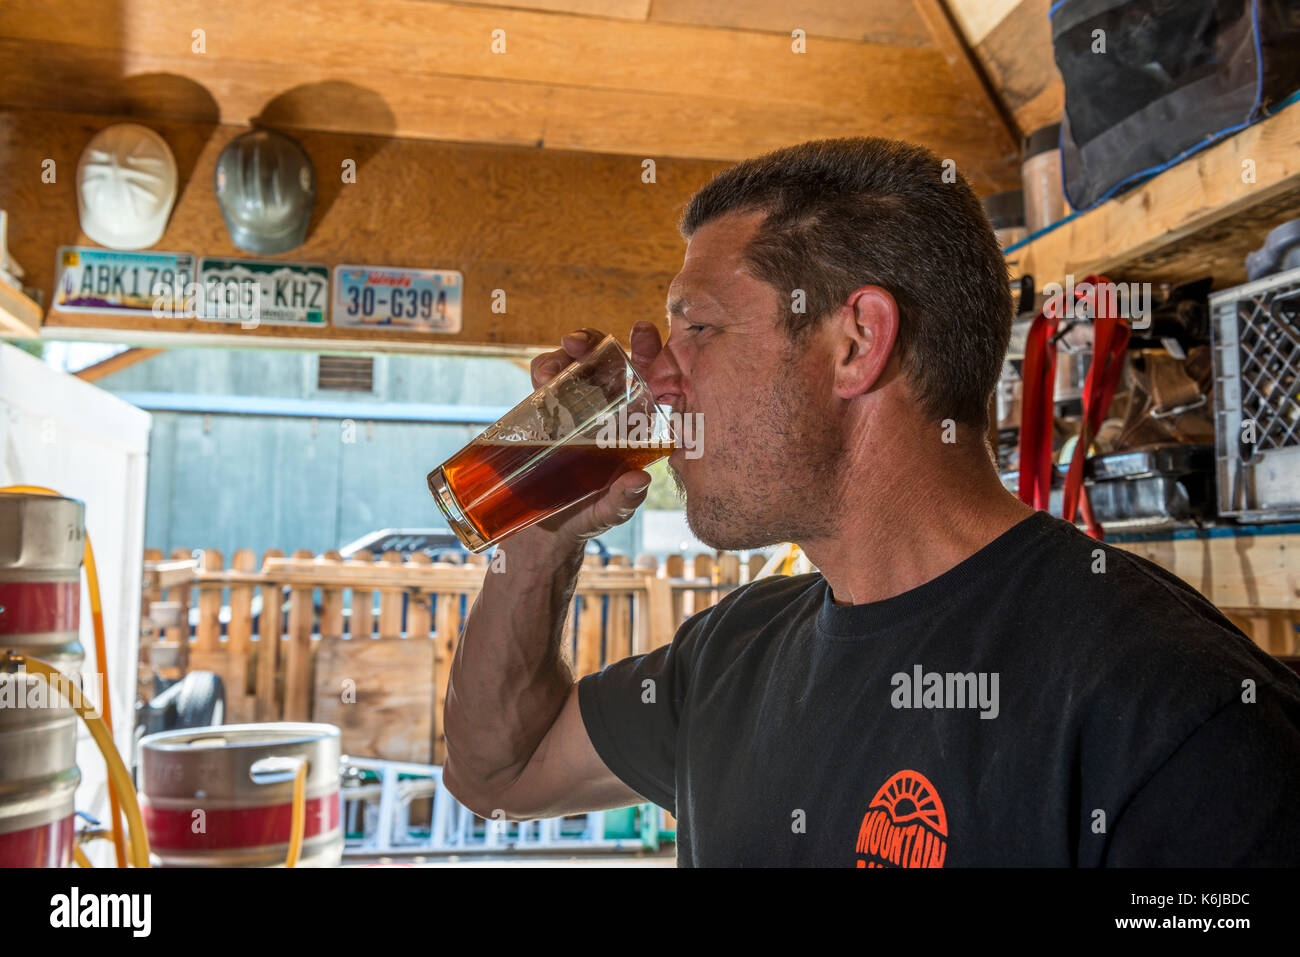 Side view of mature man tasting home brew beer, Bishop, California, USA Stock Photo